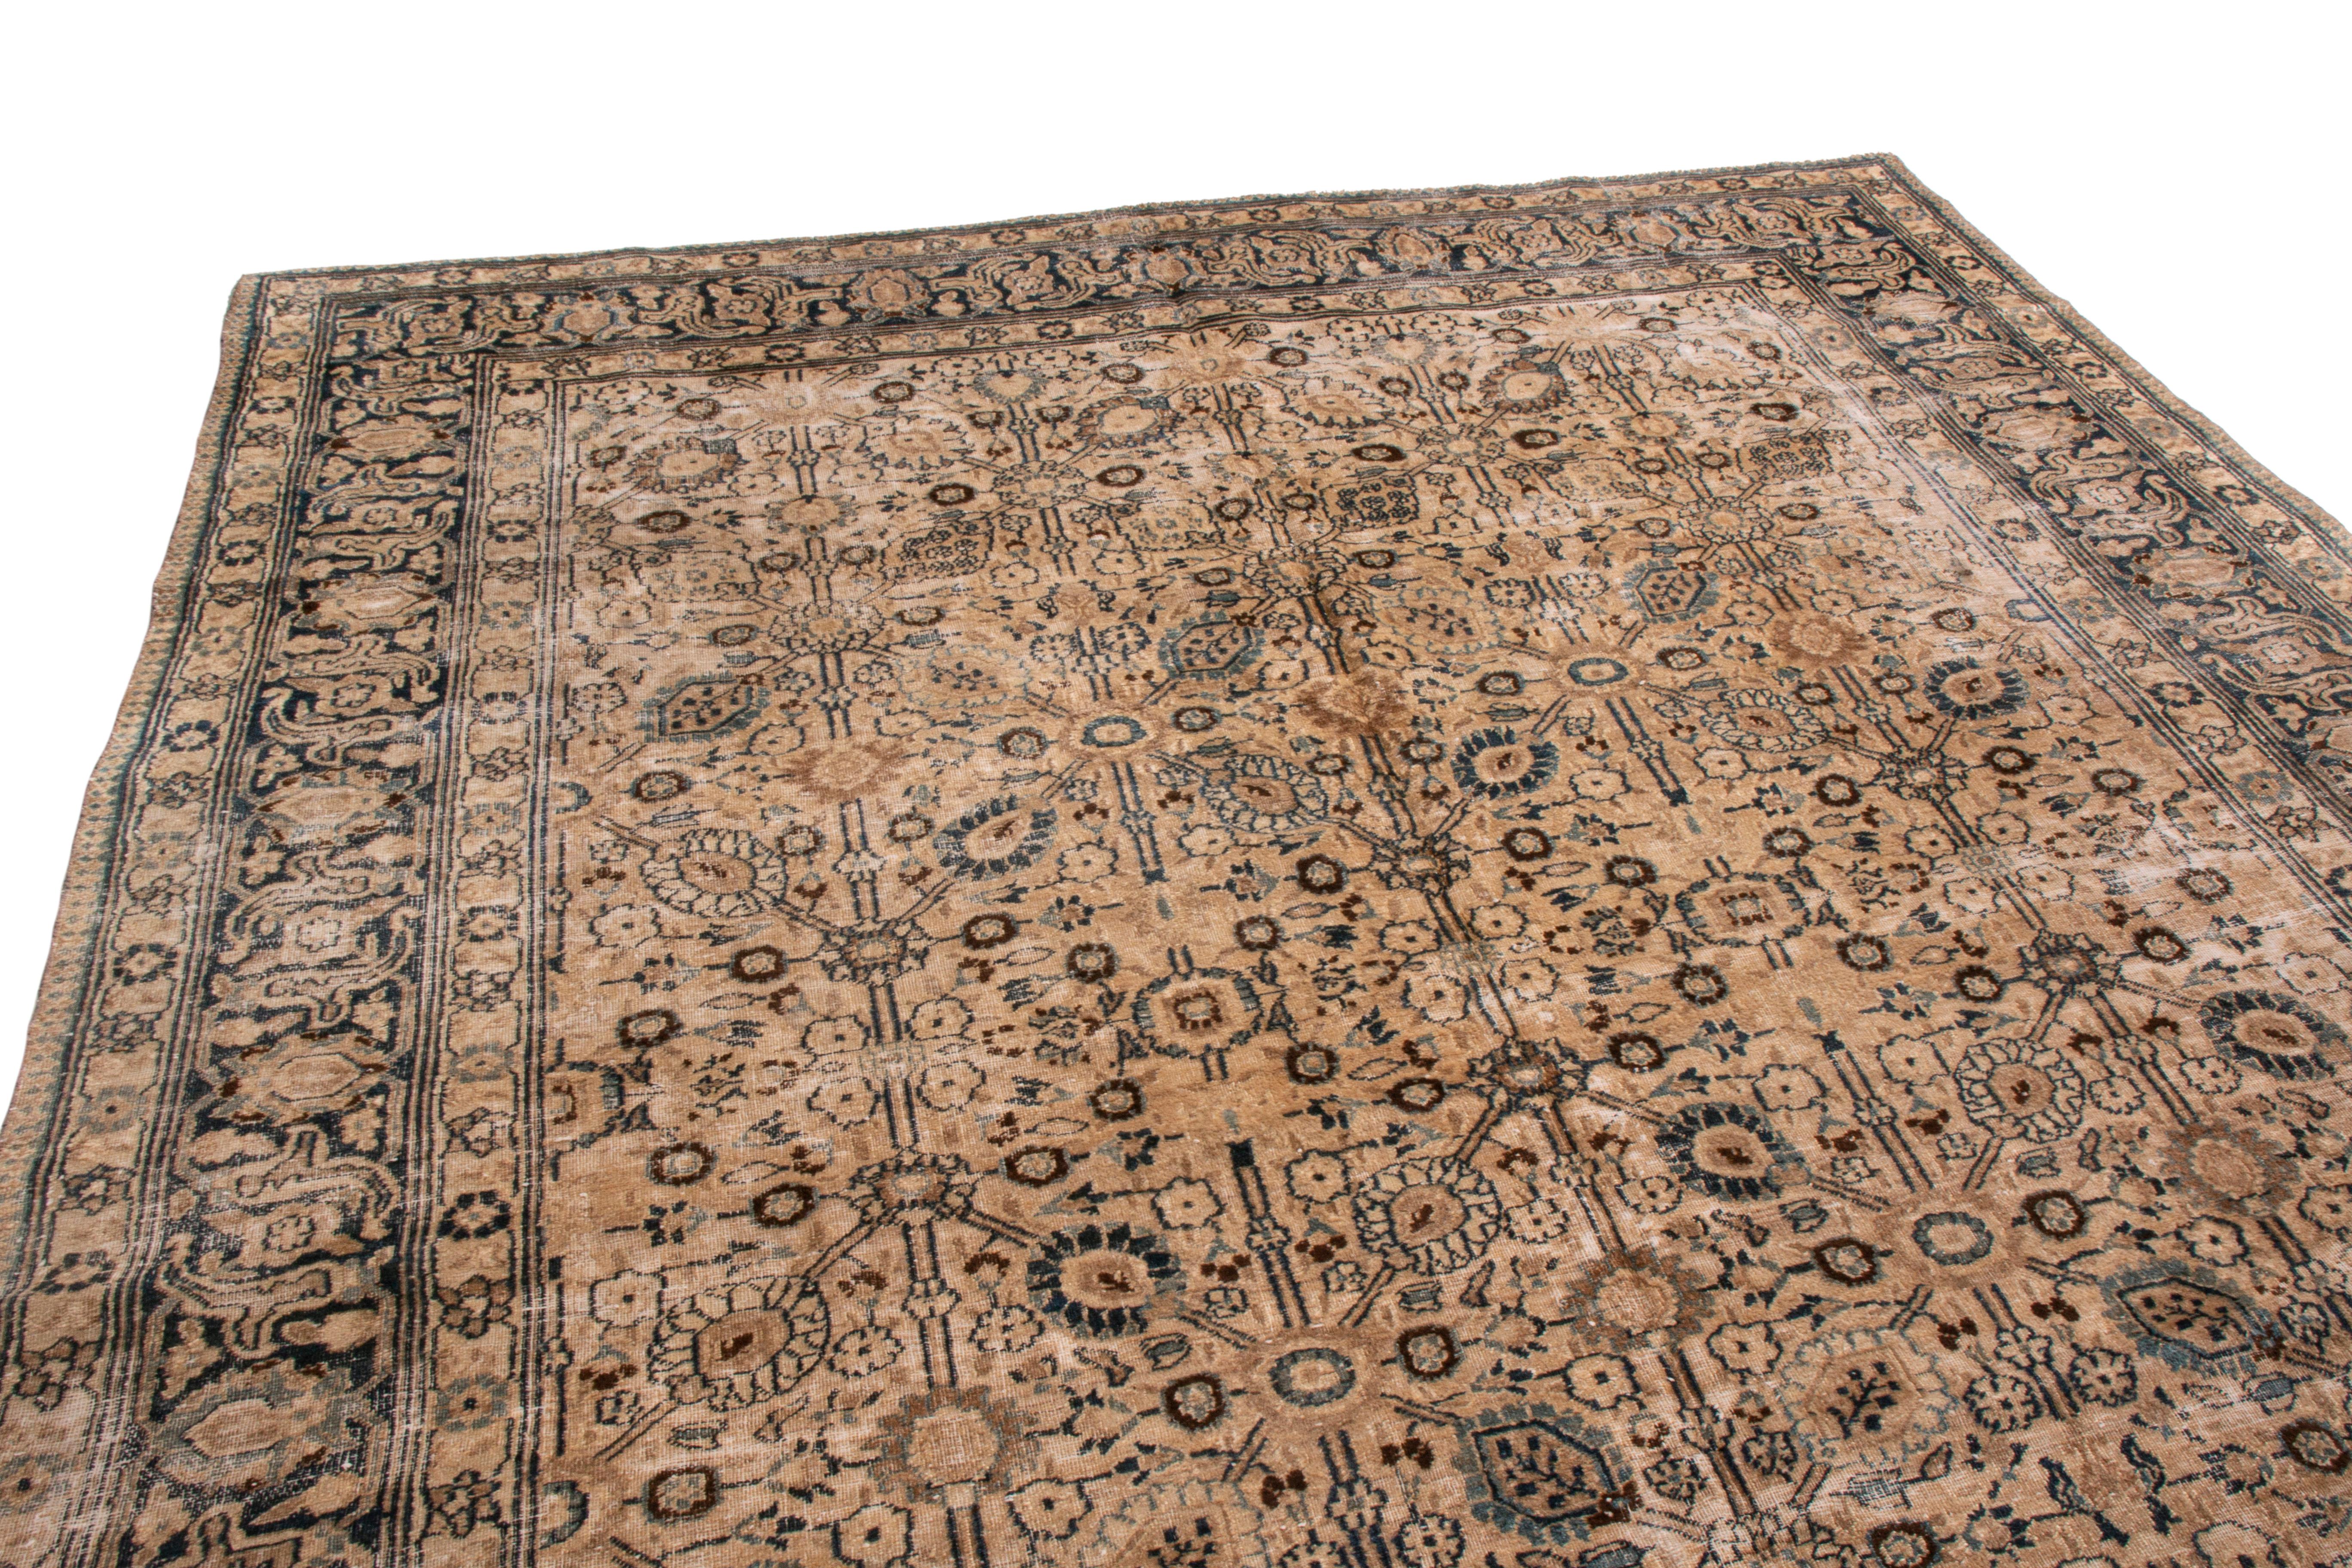 This antique Doroksh transitional wool rug is from Persia in 1910. The border has a highly stylized garland and vine scroll pattern—idyllic of Persian rugs—though the field’s geometric-floral design is more transitional with minor modern influences